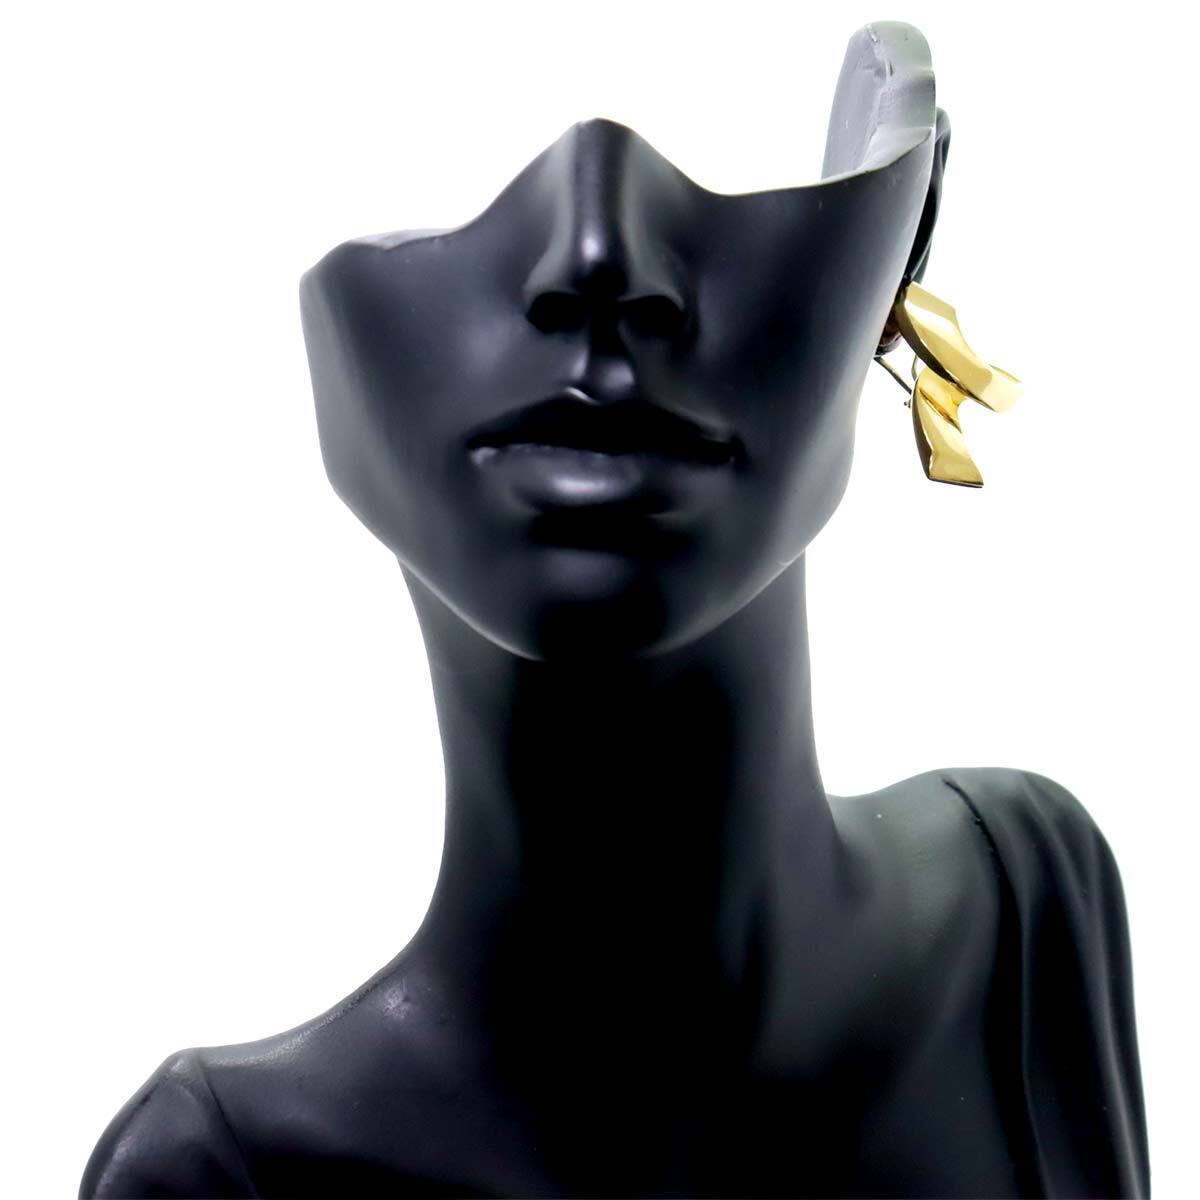  Tiffany TIFFANY&Co.paroma* Picasso earrings K18 YG yellow gold 750 Earrings Clip-on 90201082